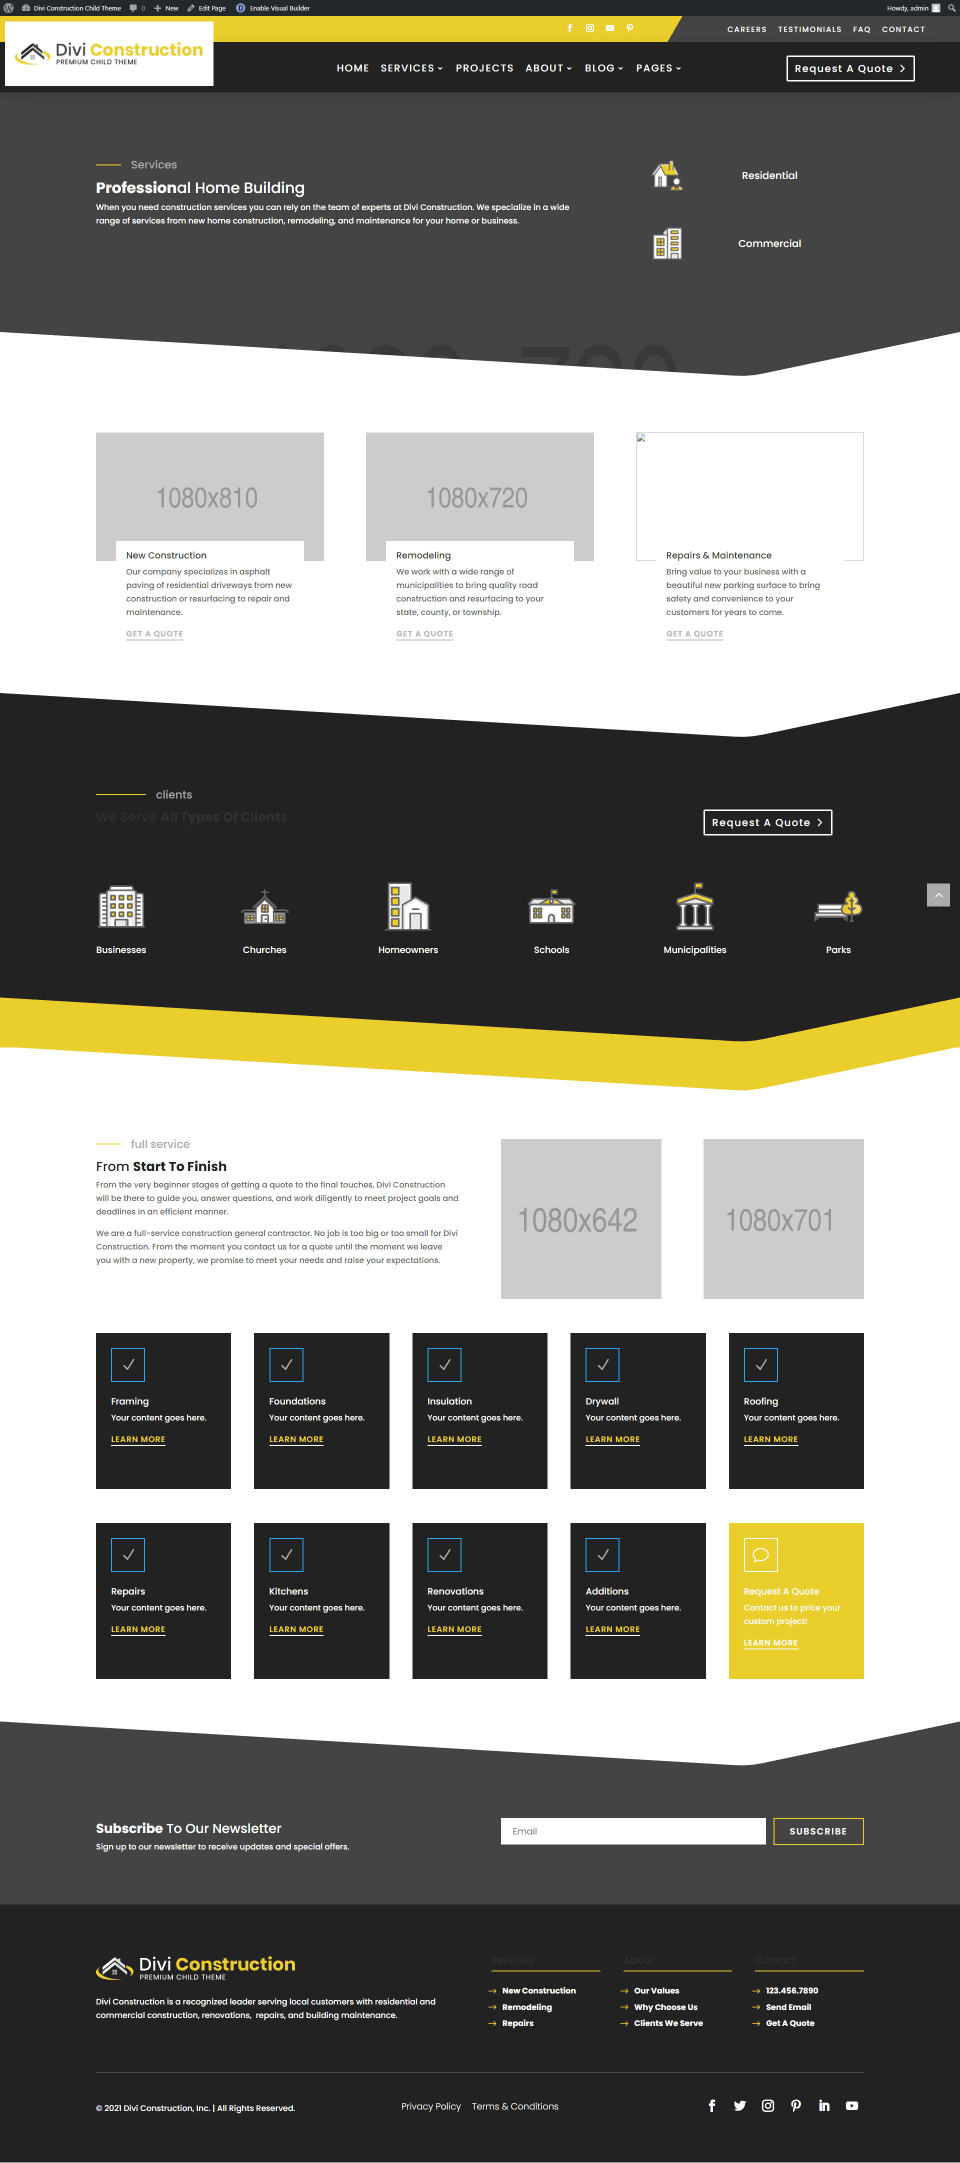  Services Page